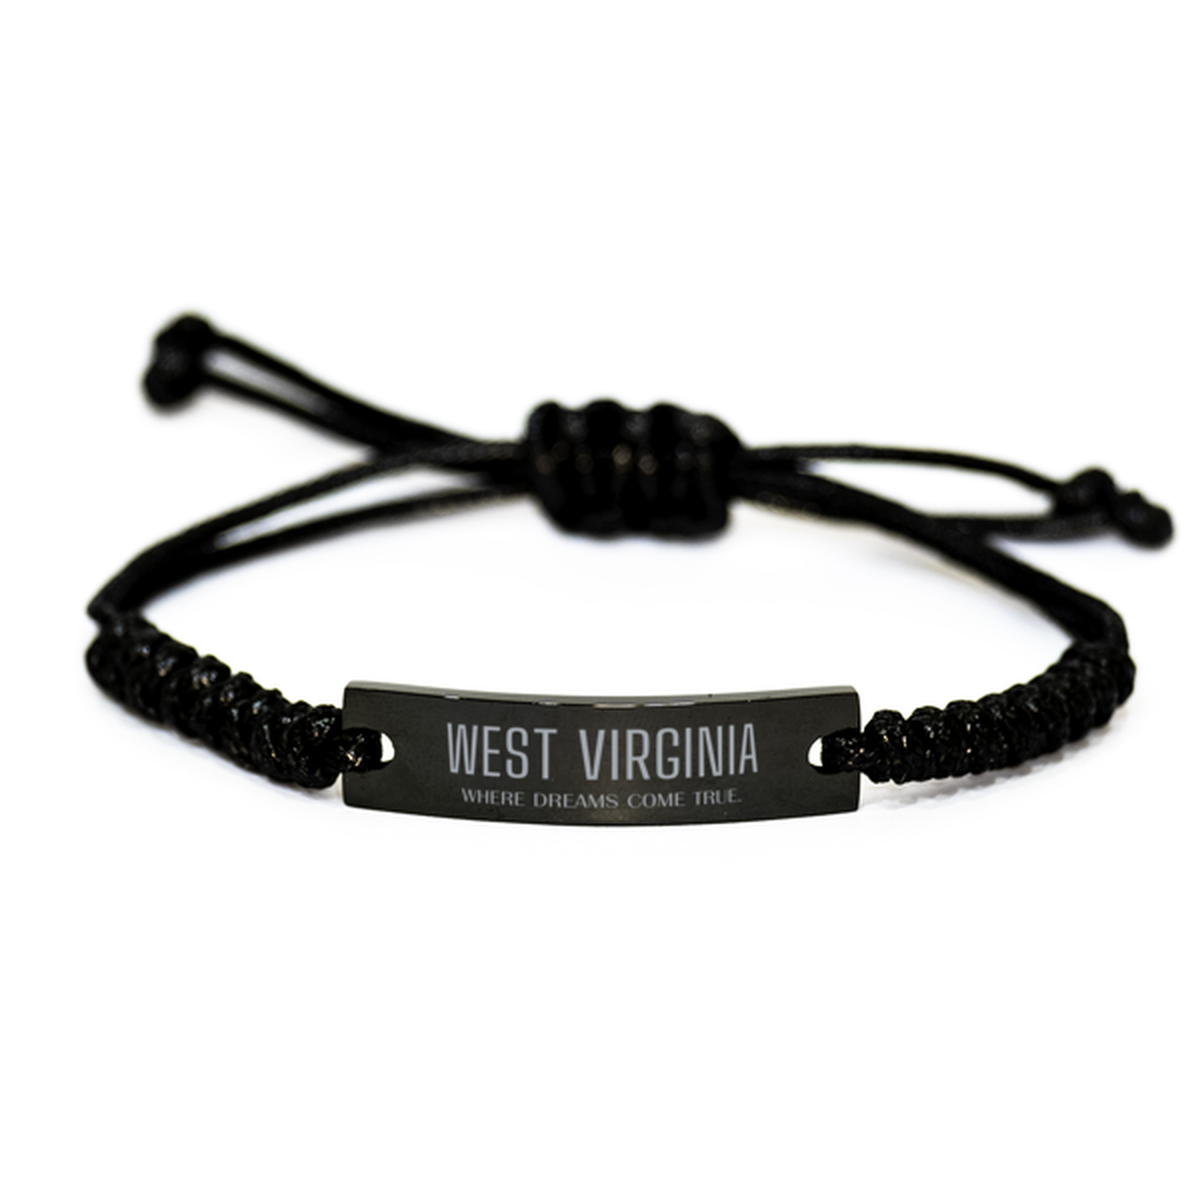 Love West Virginia State Black Rope Bracelet, West Virginia Where dreams come true, Birthday Inspirational Gifts For West Virginia Men, Women, Friends